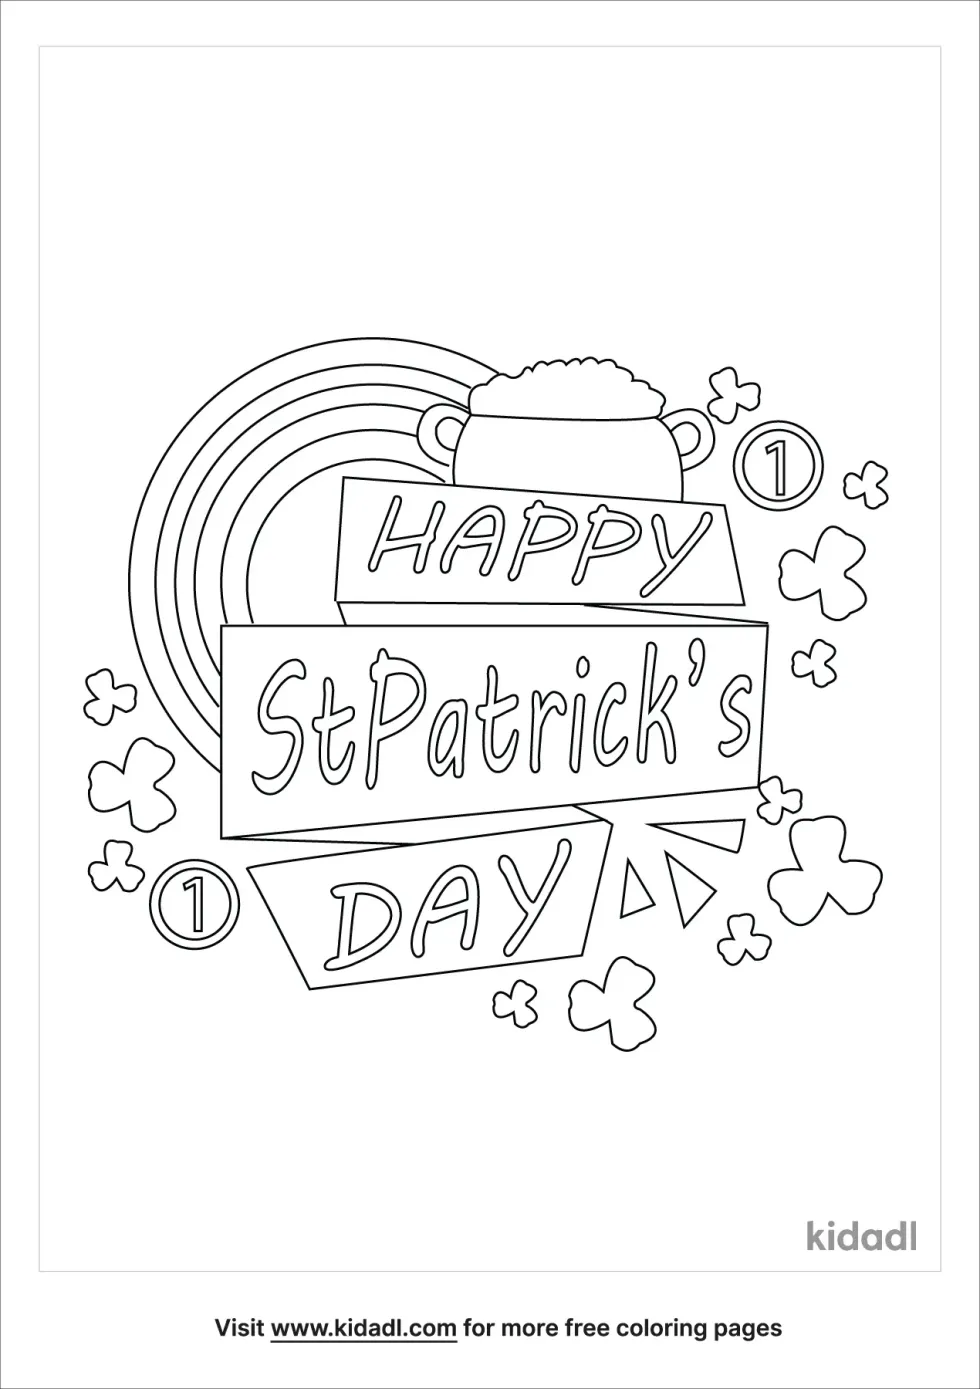 St Patrick's Day Rainbow Coloring Page